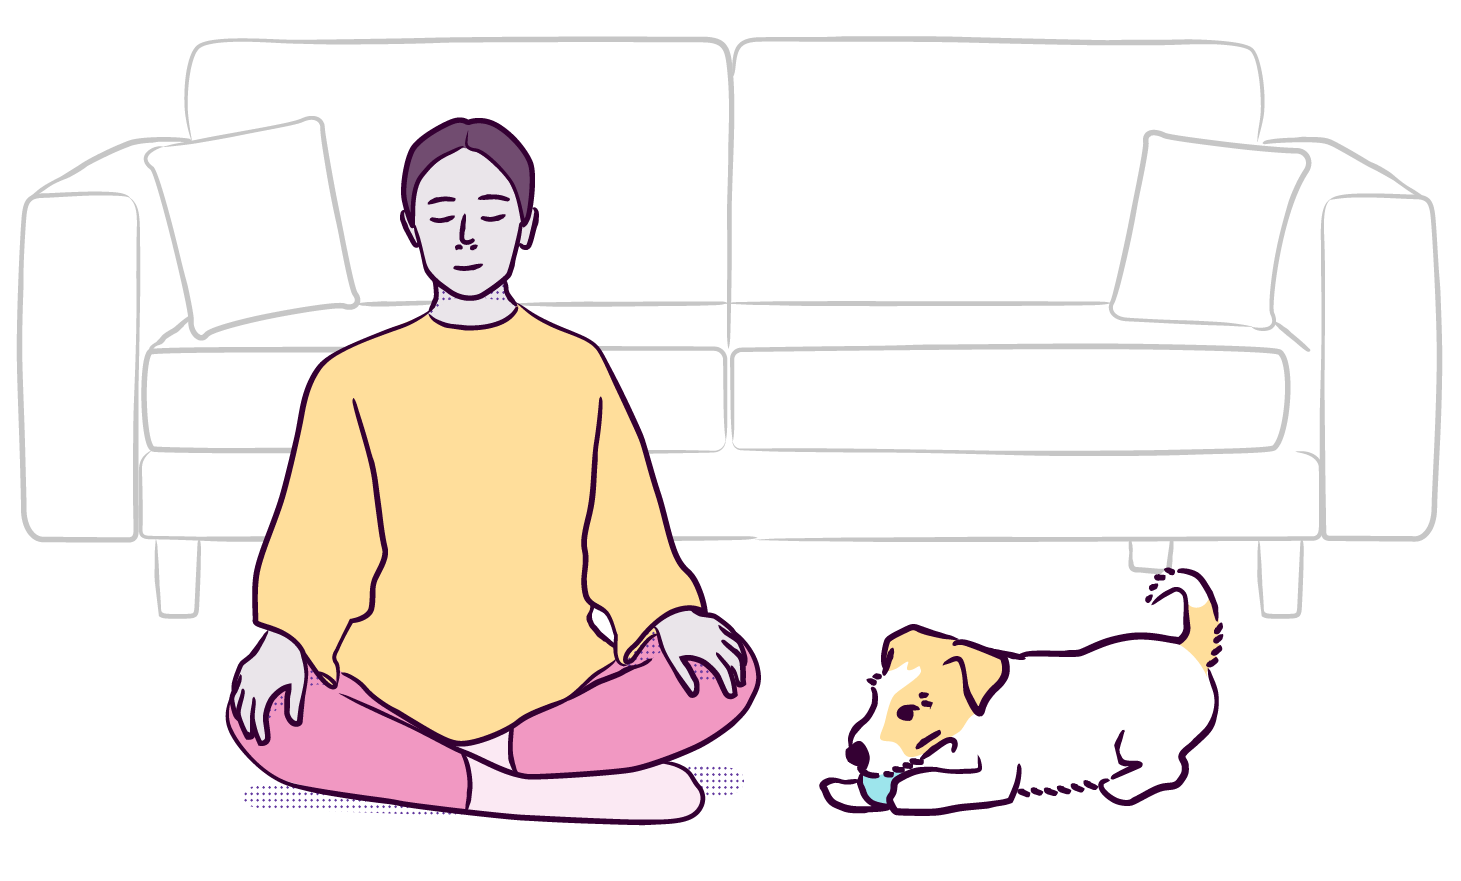 illustration of a person meditating as a dog plays next to them